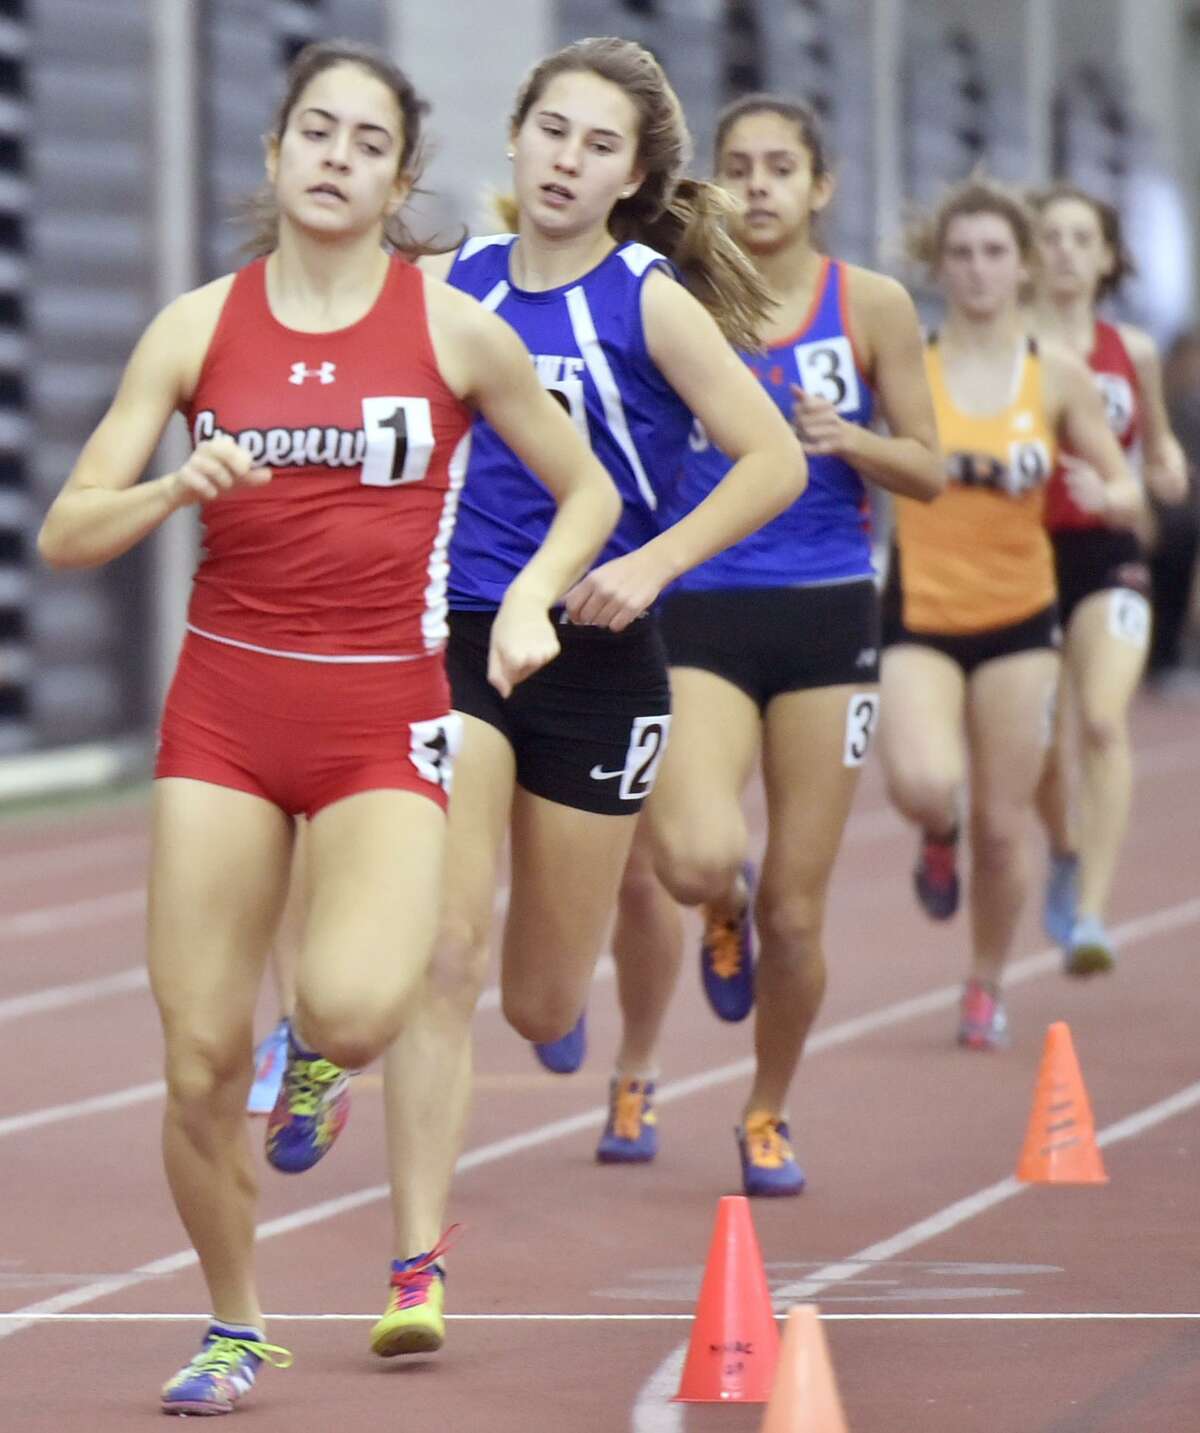 New Haven, Connecticut - Saturday, February 10, 2018: Girls 1000 meter run winner Emily Philippides of Greenwich H.S., left, runs ahead of eventual third place winner Alyssa Kraus of Fairfield-Ludlowe H.S. during the 2018 State Class LL Girls and Boys Indoor Track and Field Championship at the Floyd Little Athletic Center in New Haven .